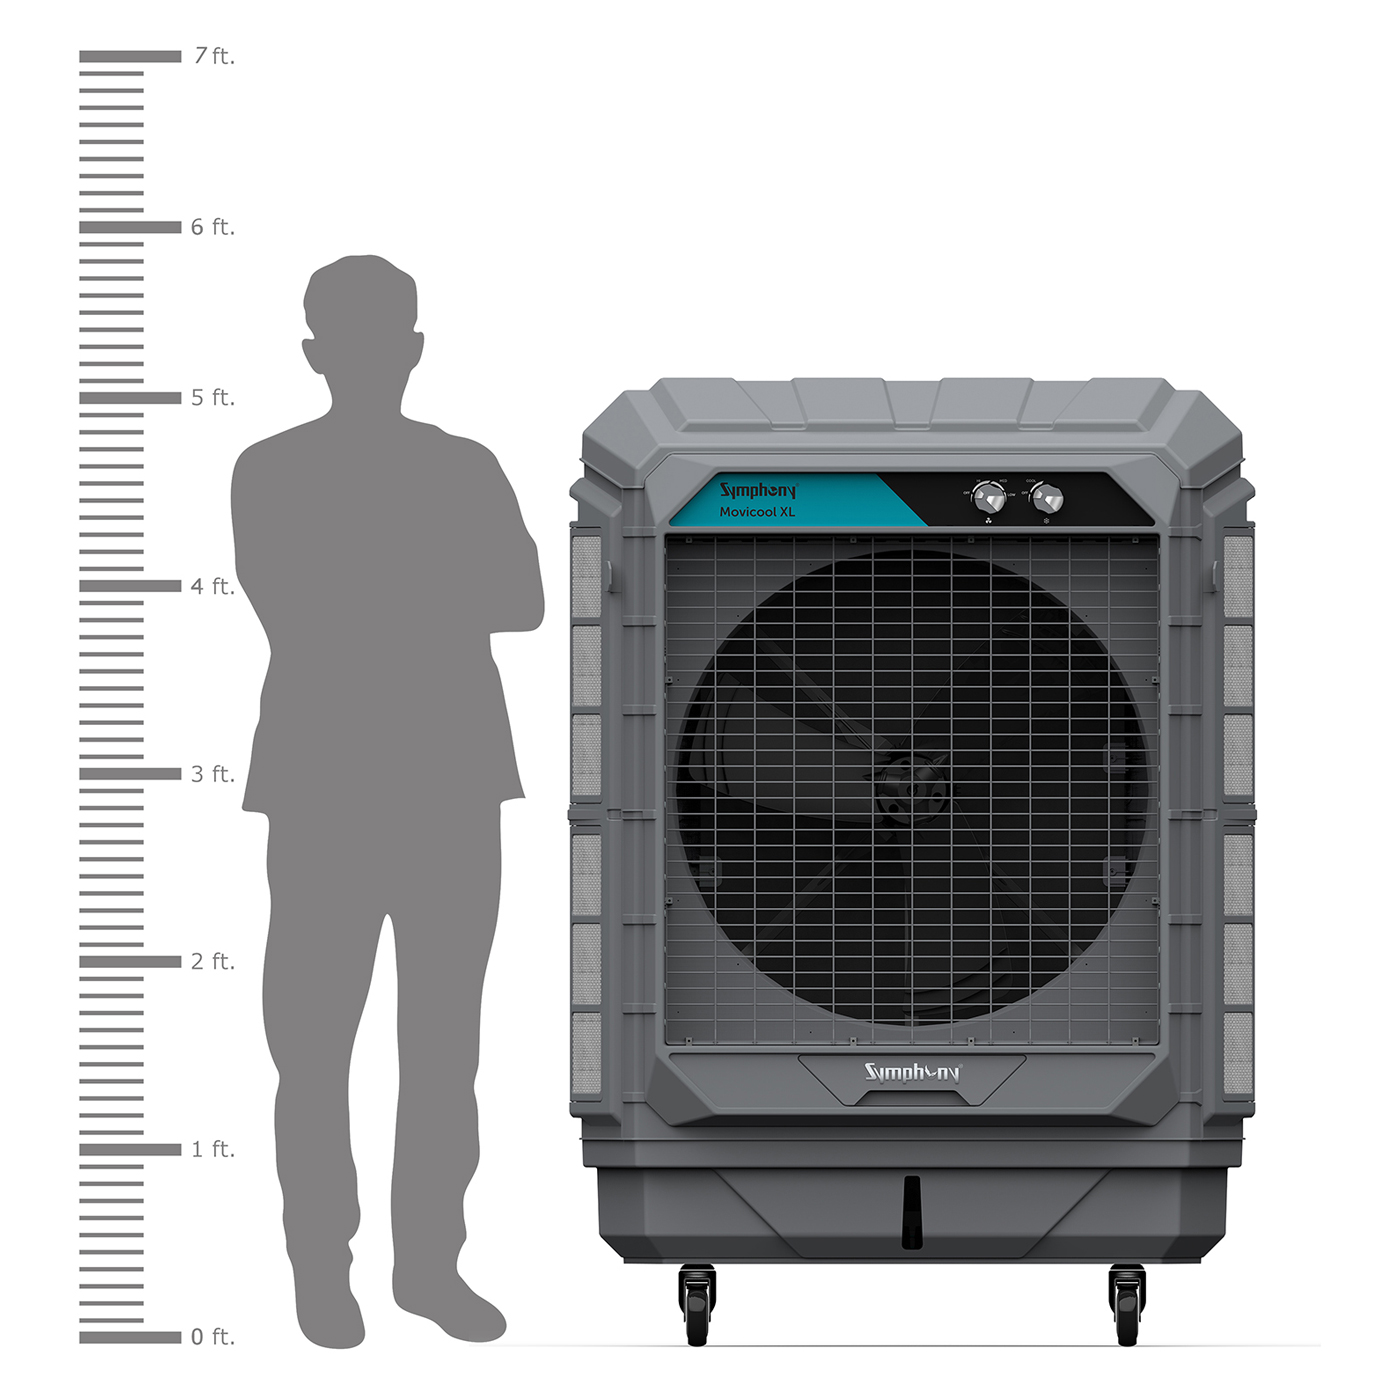 Movicool XL 100 Commercial Cooler with 3-side high efficiency honeycomb pads